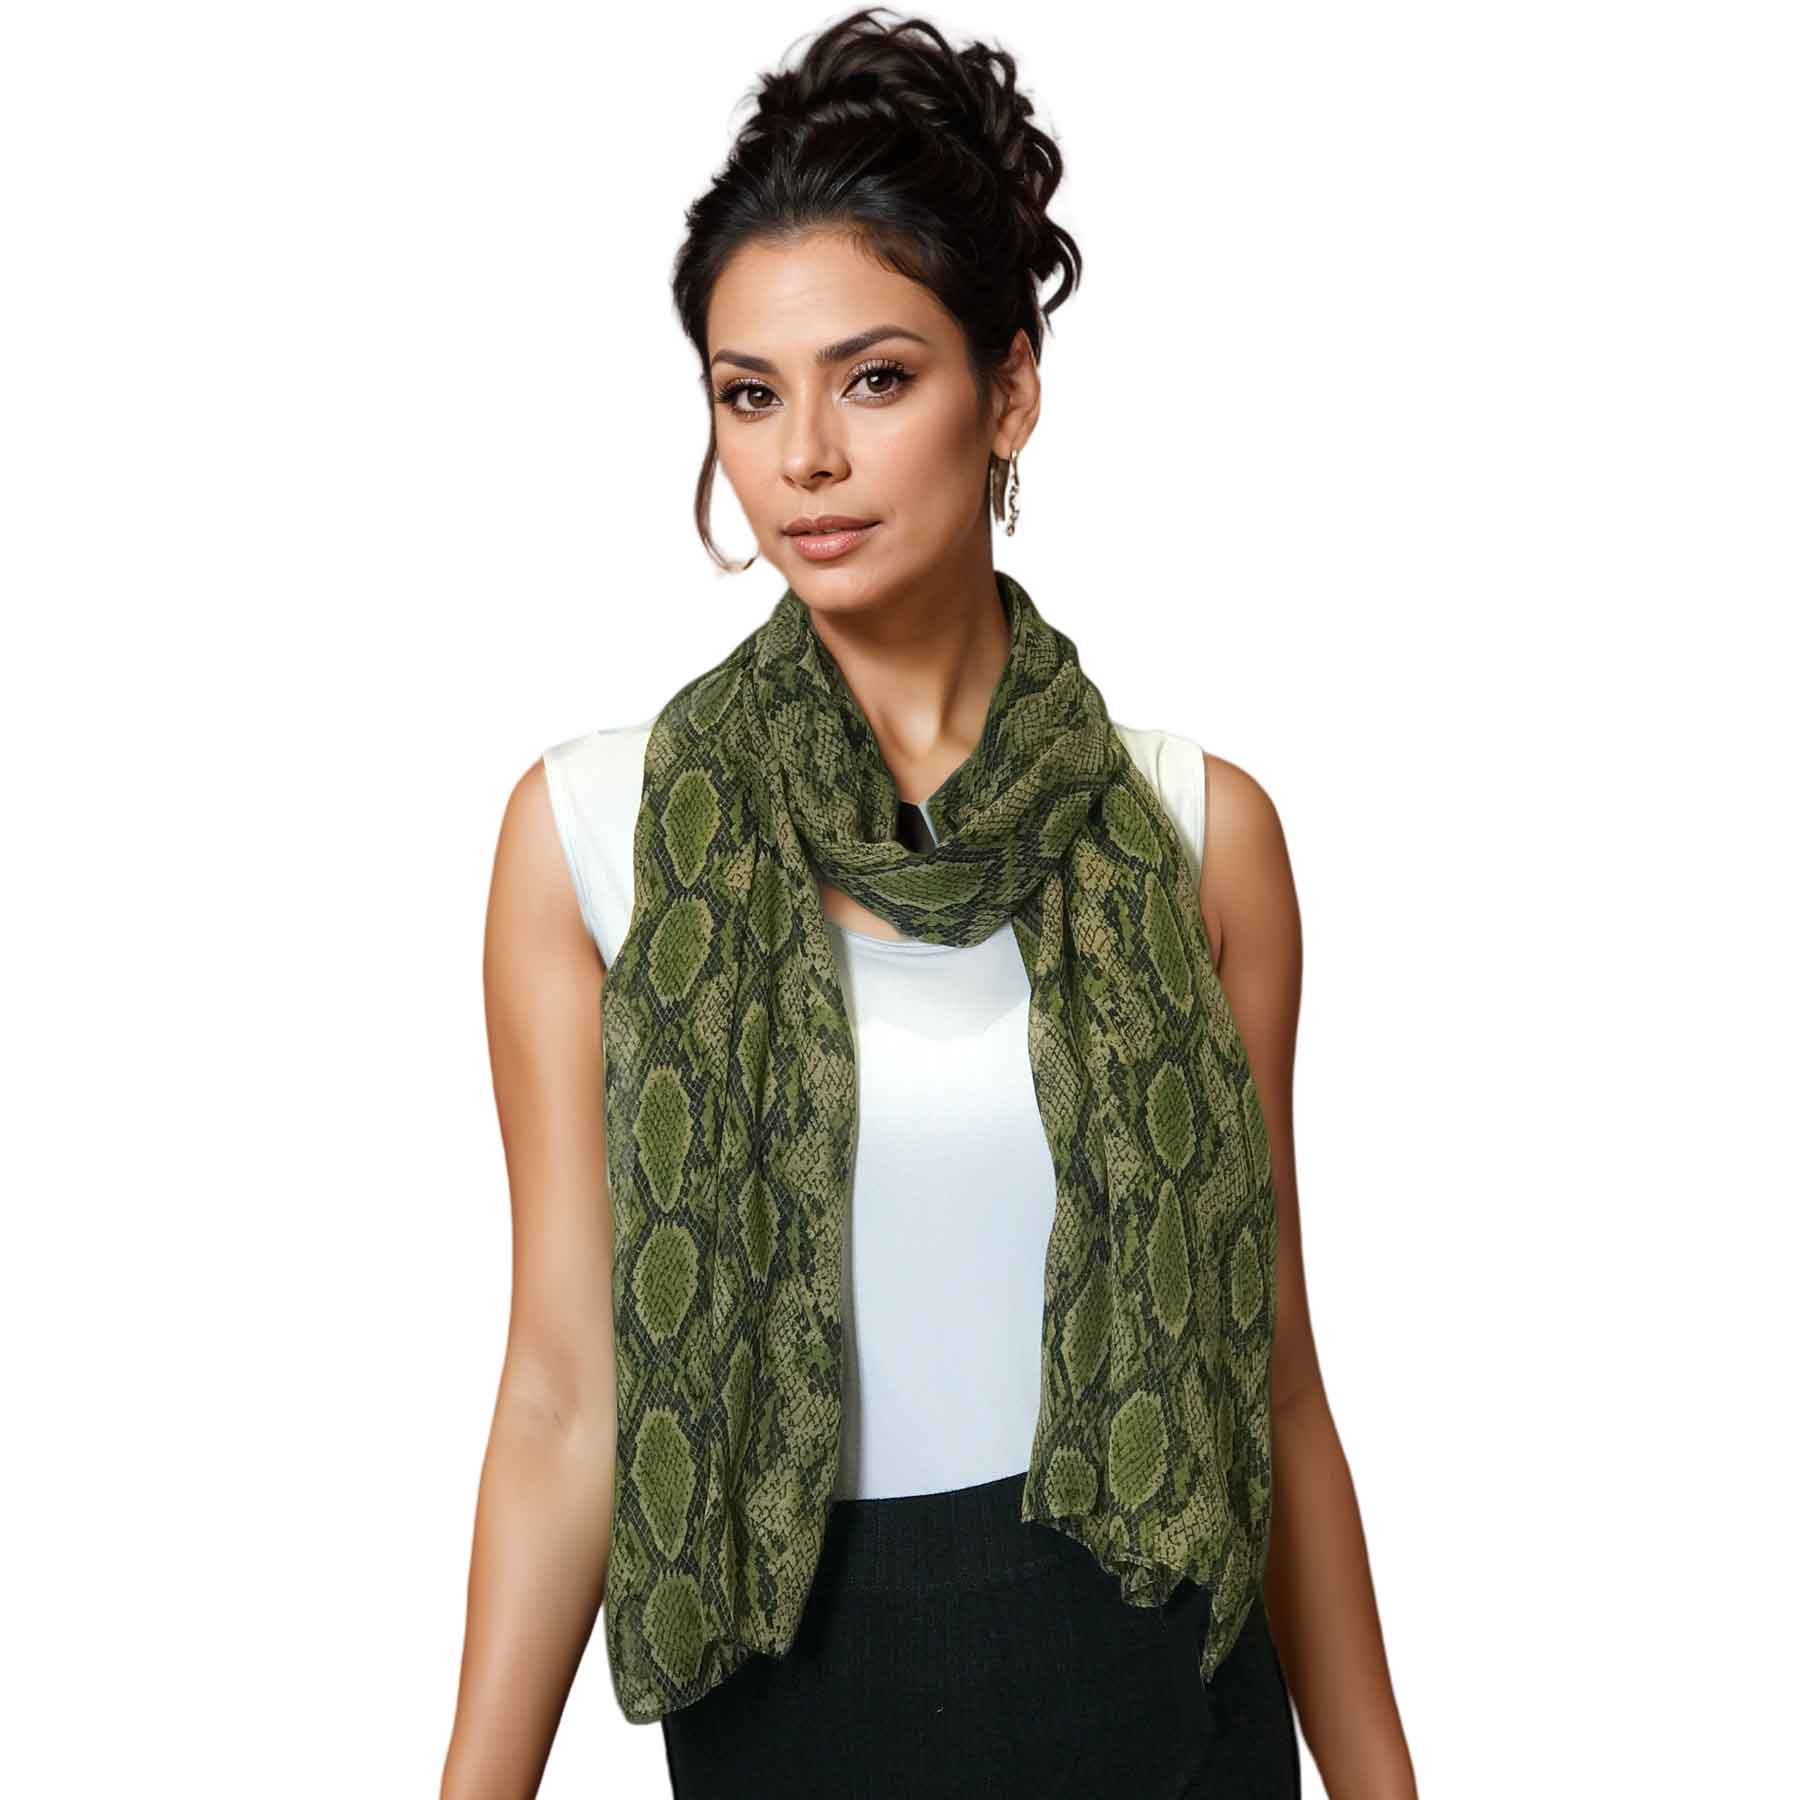 4116 - Olive<br>
Reptile Print Scarf